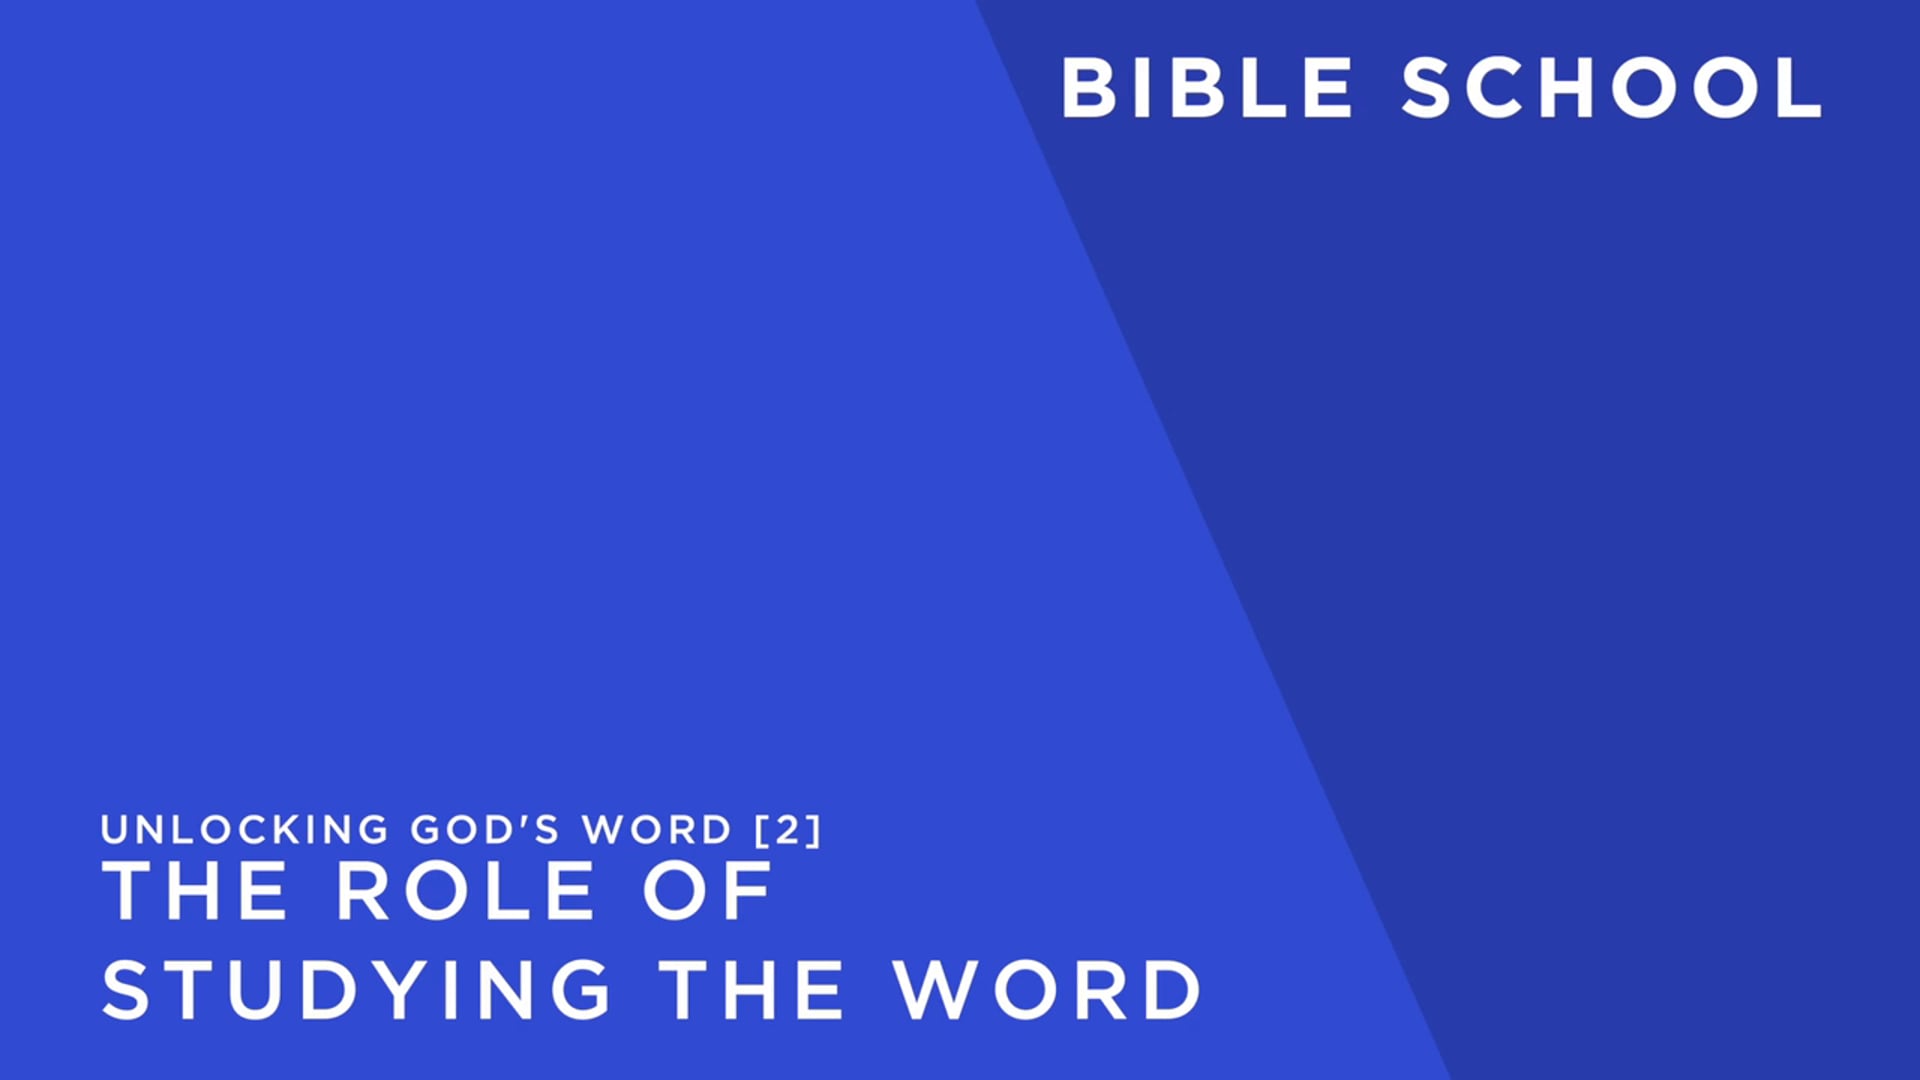 UNLOCKING GOD'S WORD 2 The Role of Studying God's Word